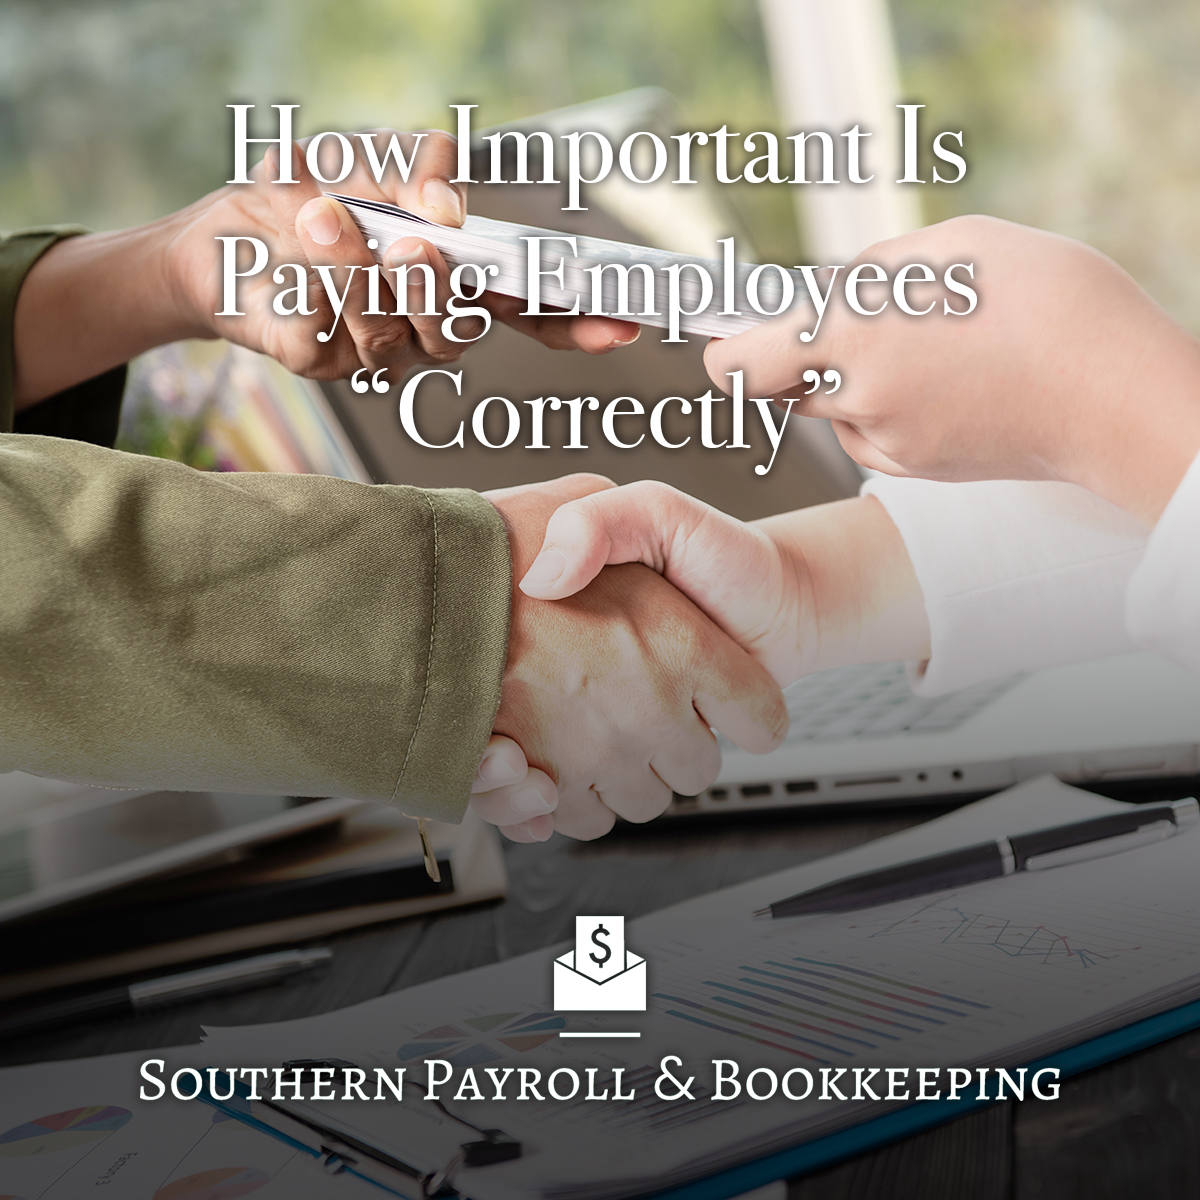 How Important Is Paying Employees “Correctly?”